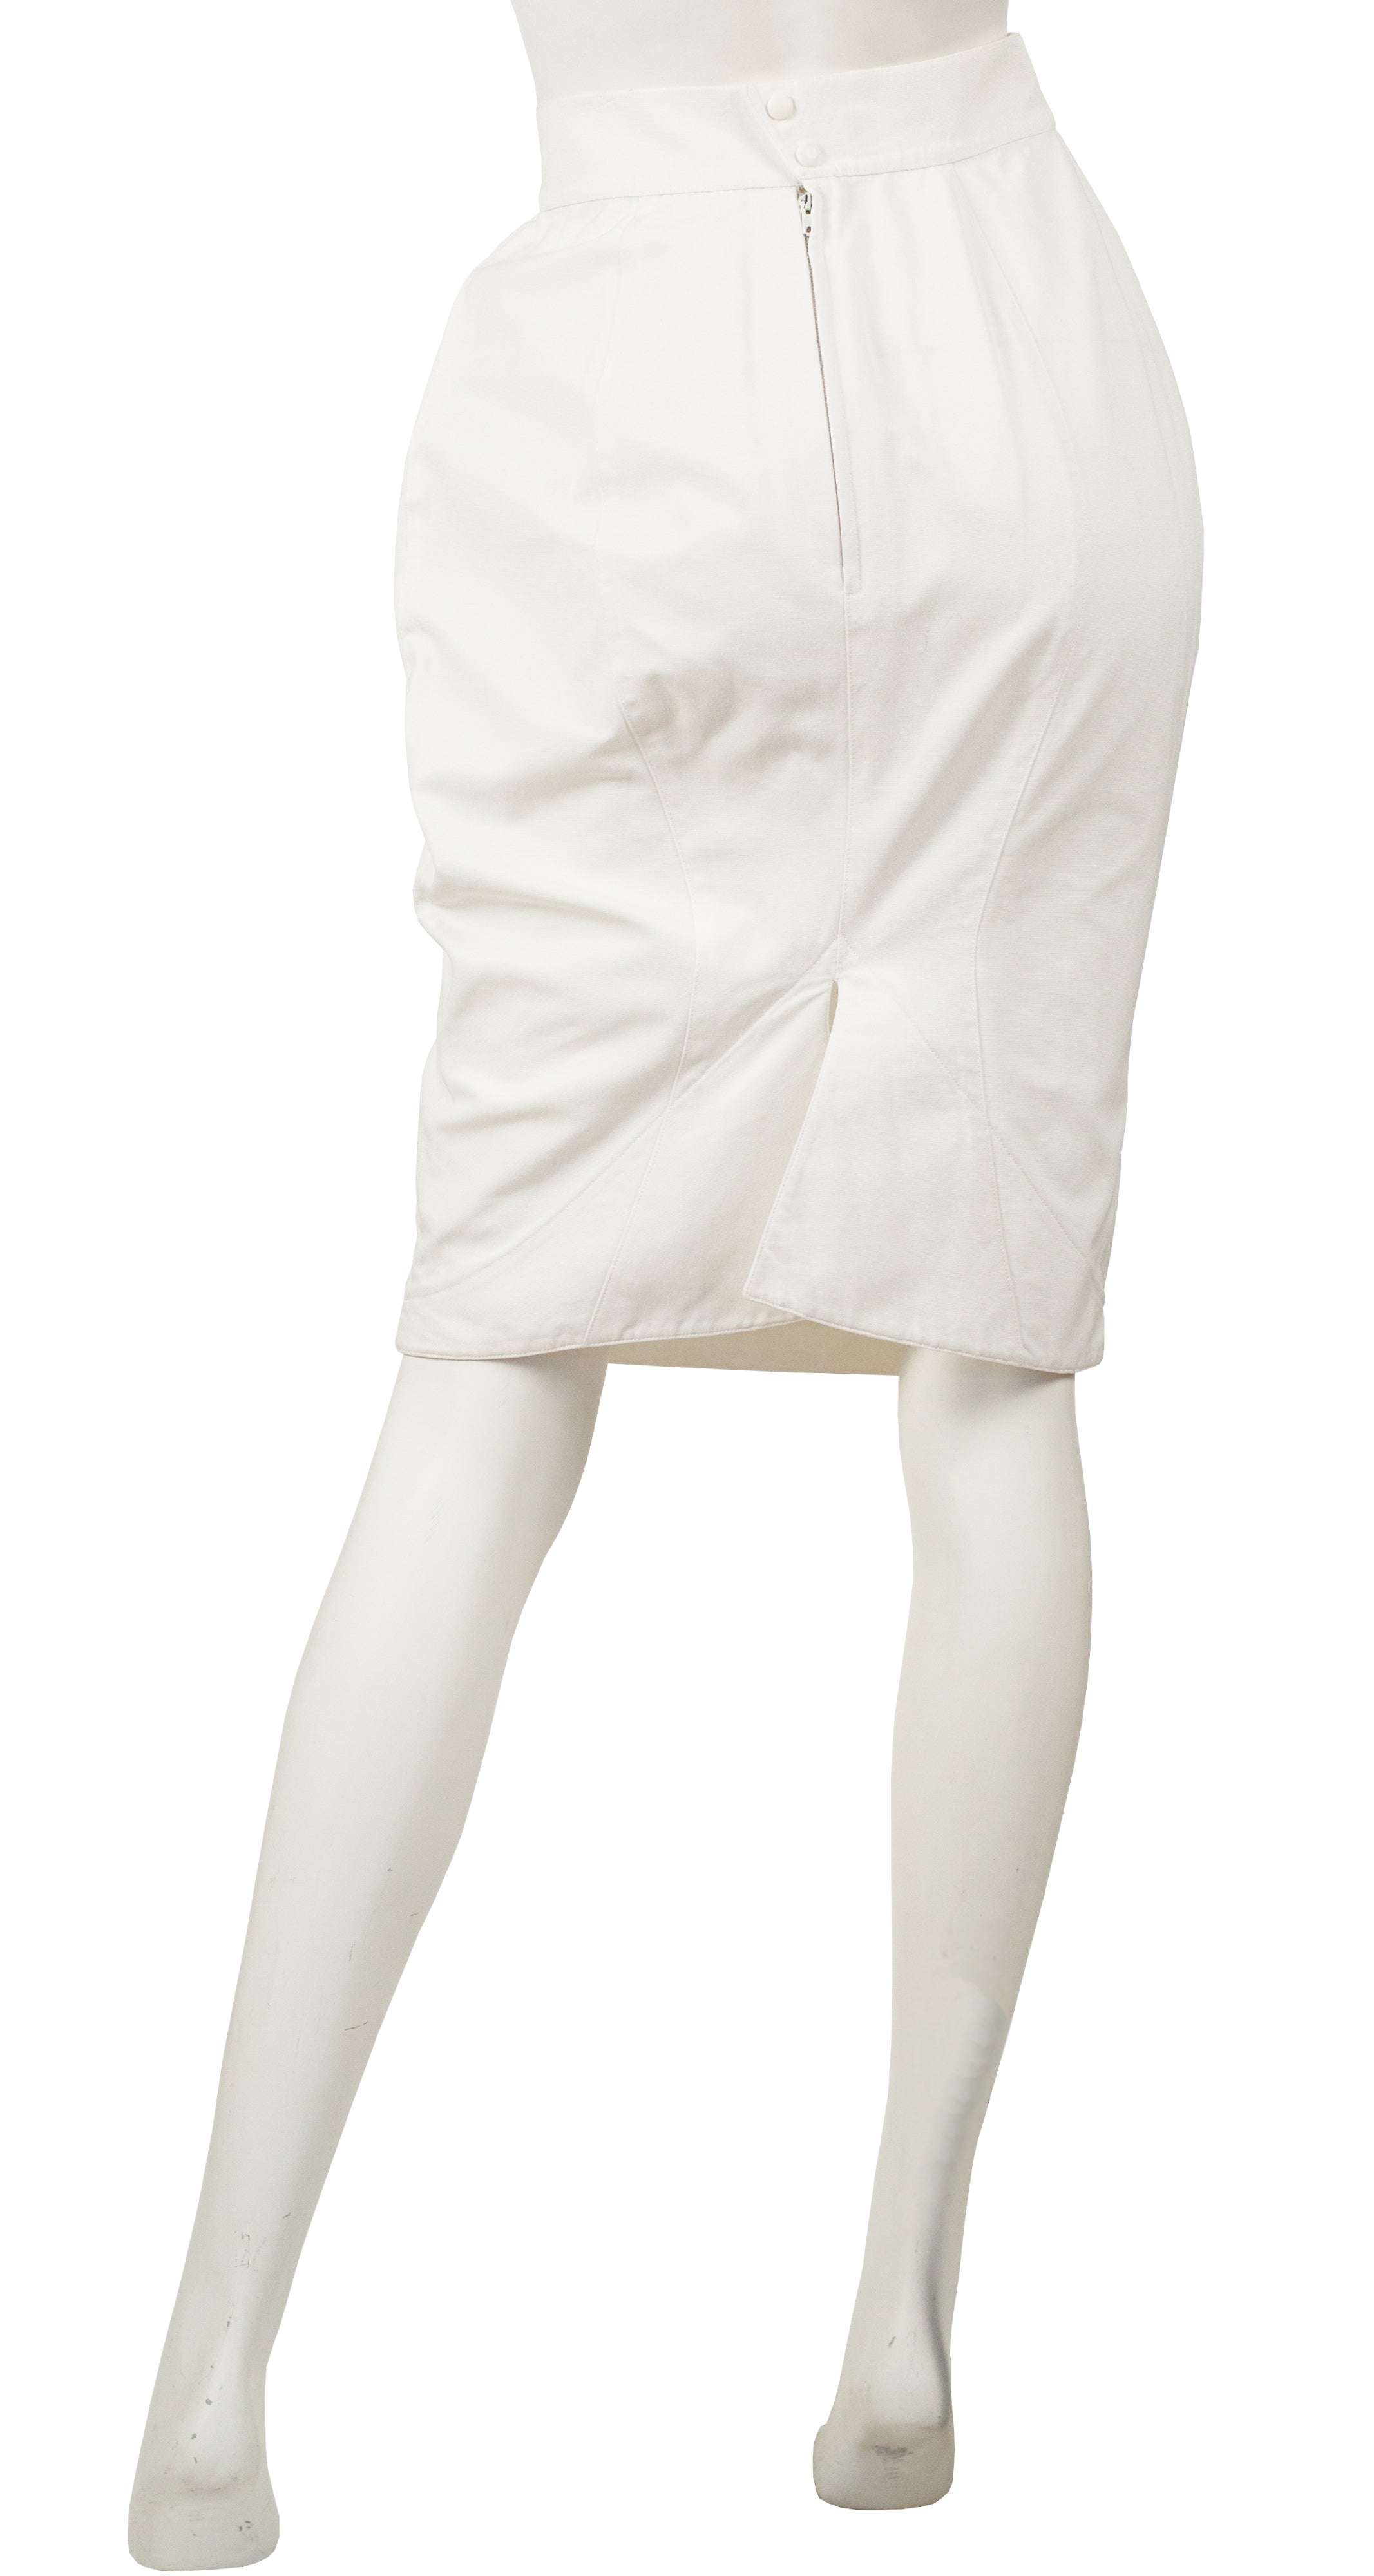 1980s White Cotton High-Waisted Pencil Skirt